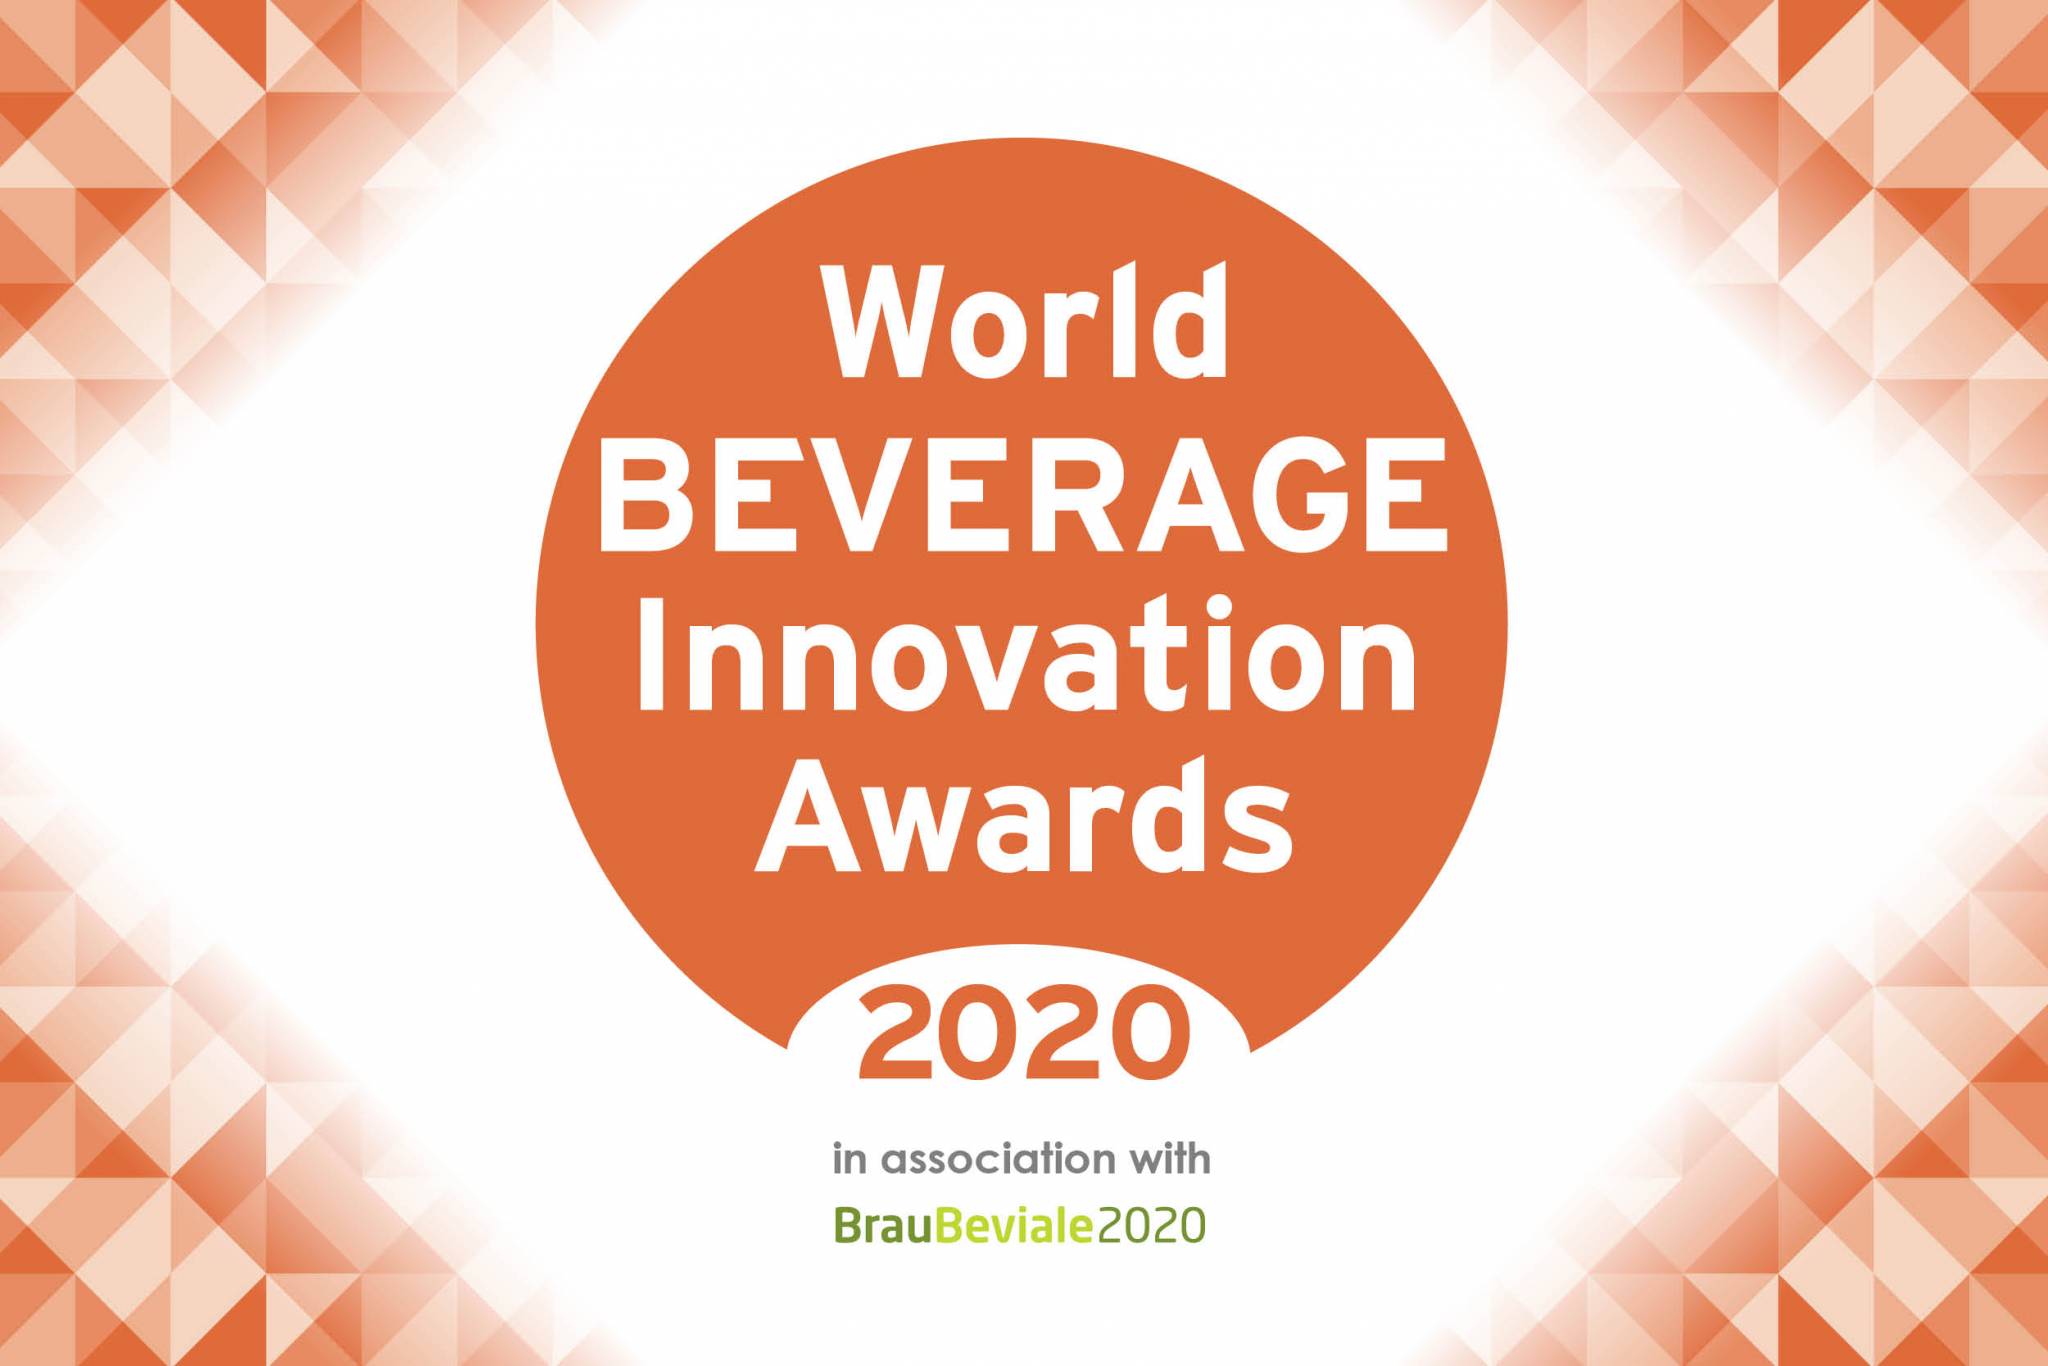 World Beverage Innovation Awards 2020 now open for entries